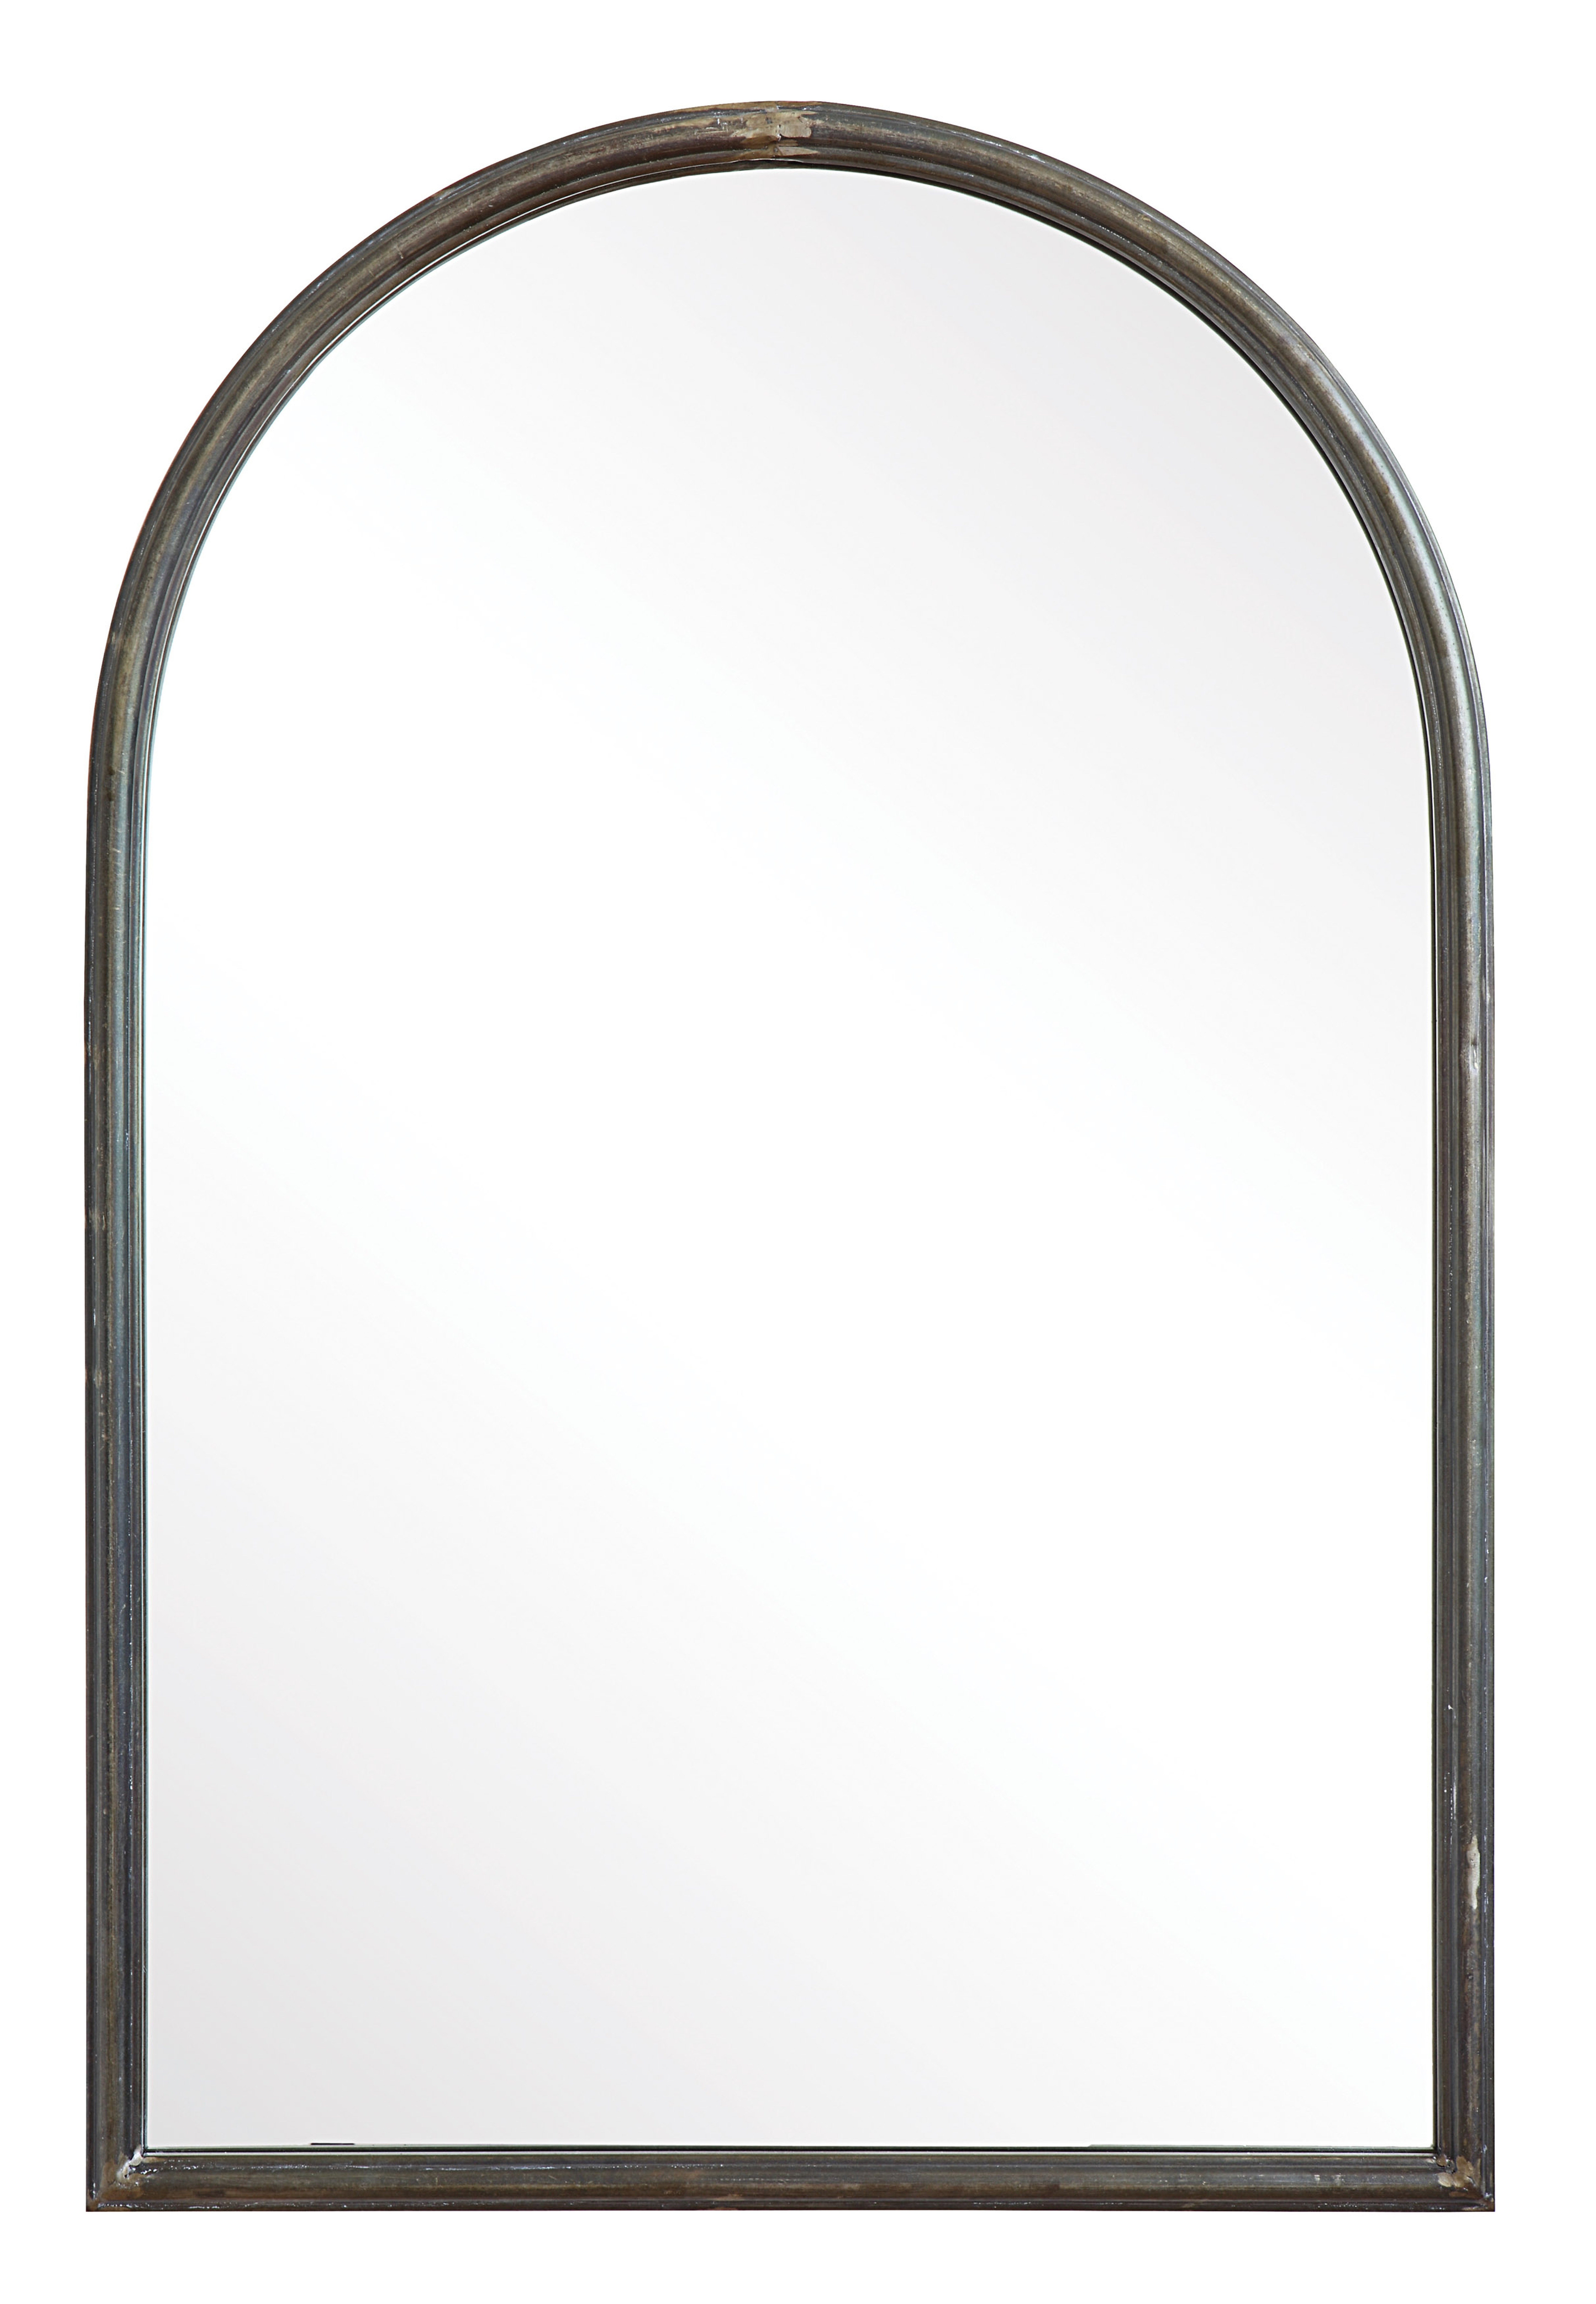 Arched Mirror with Metal Trim - Nomad Home